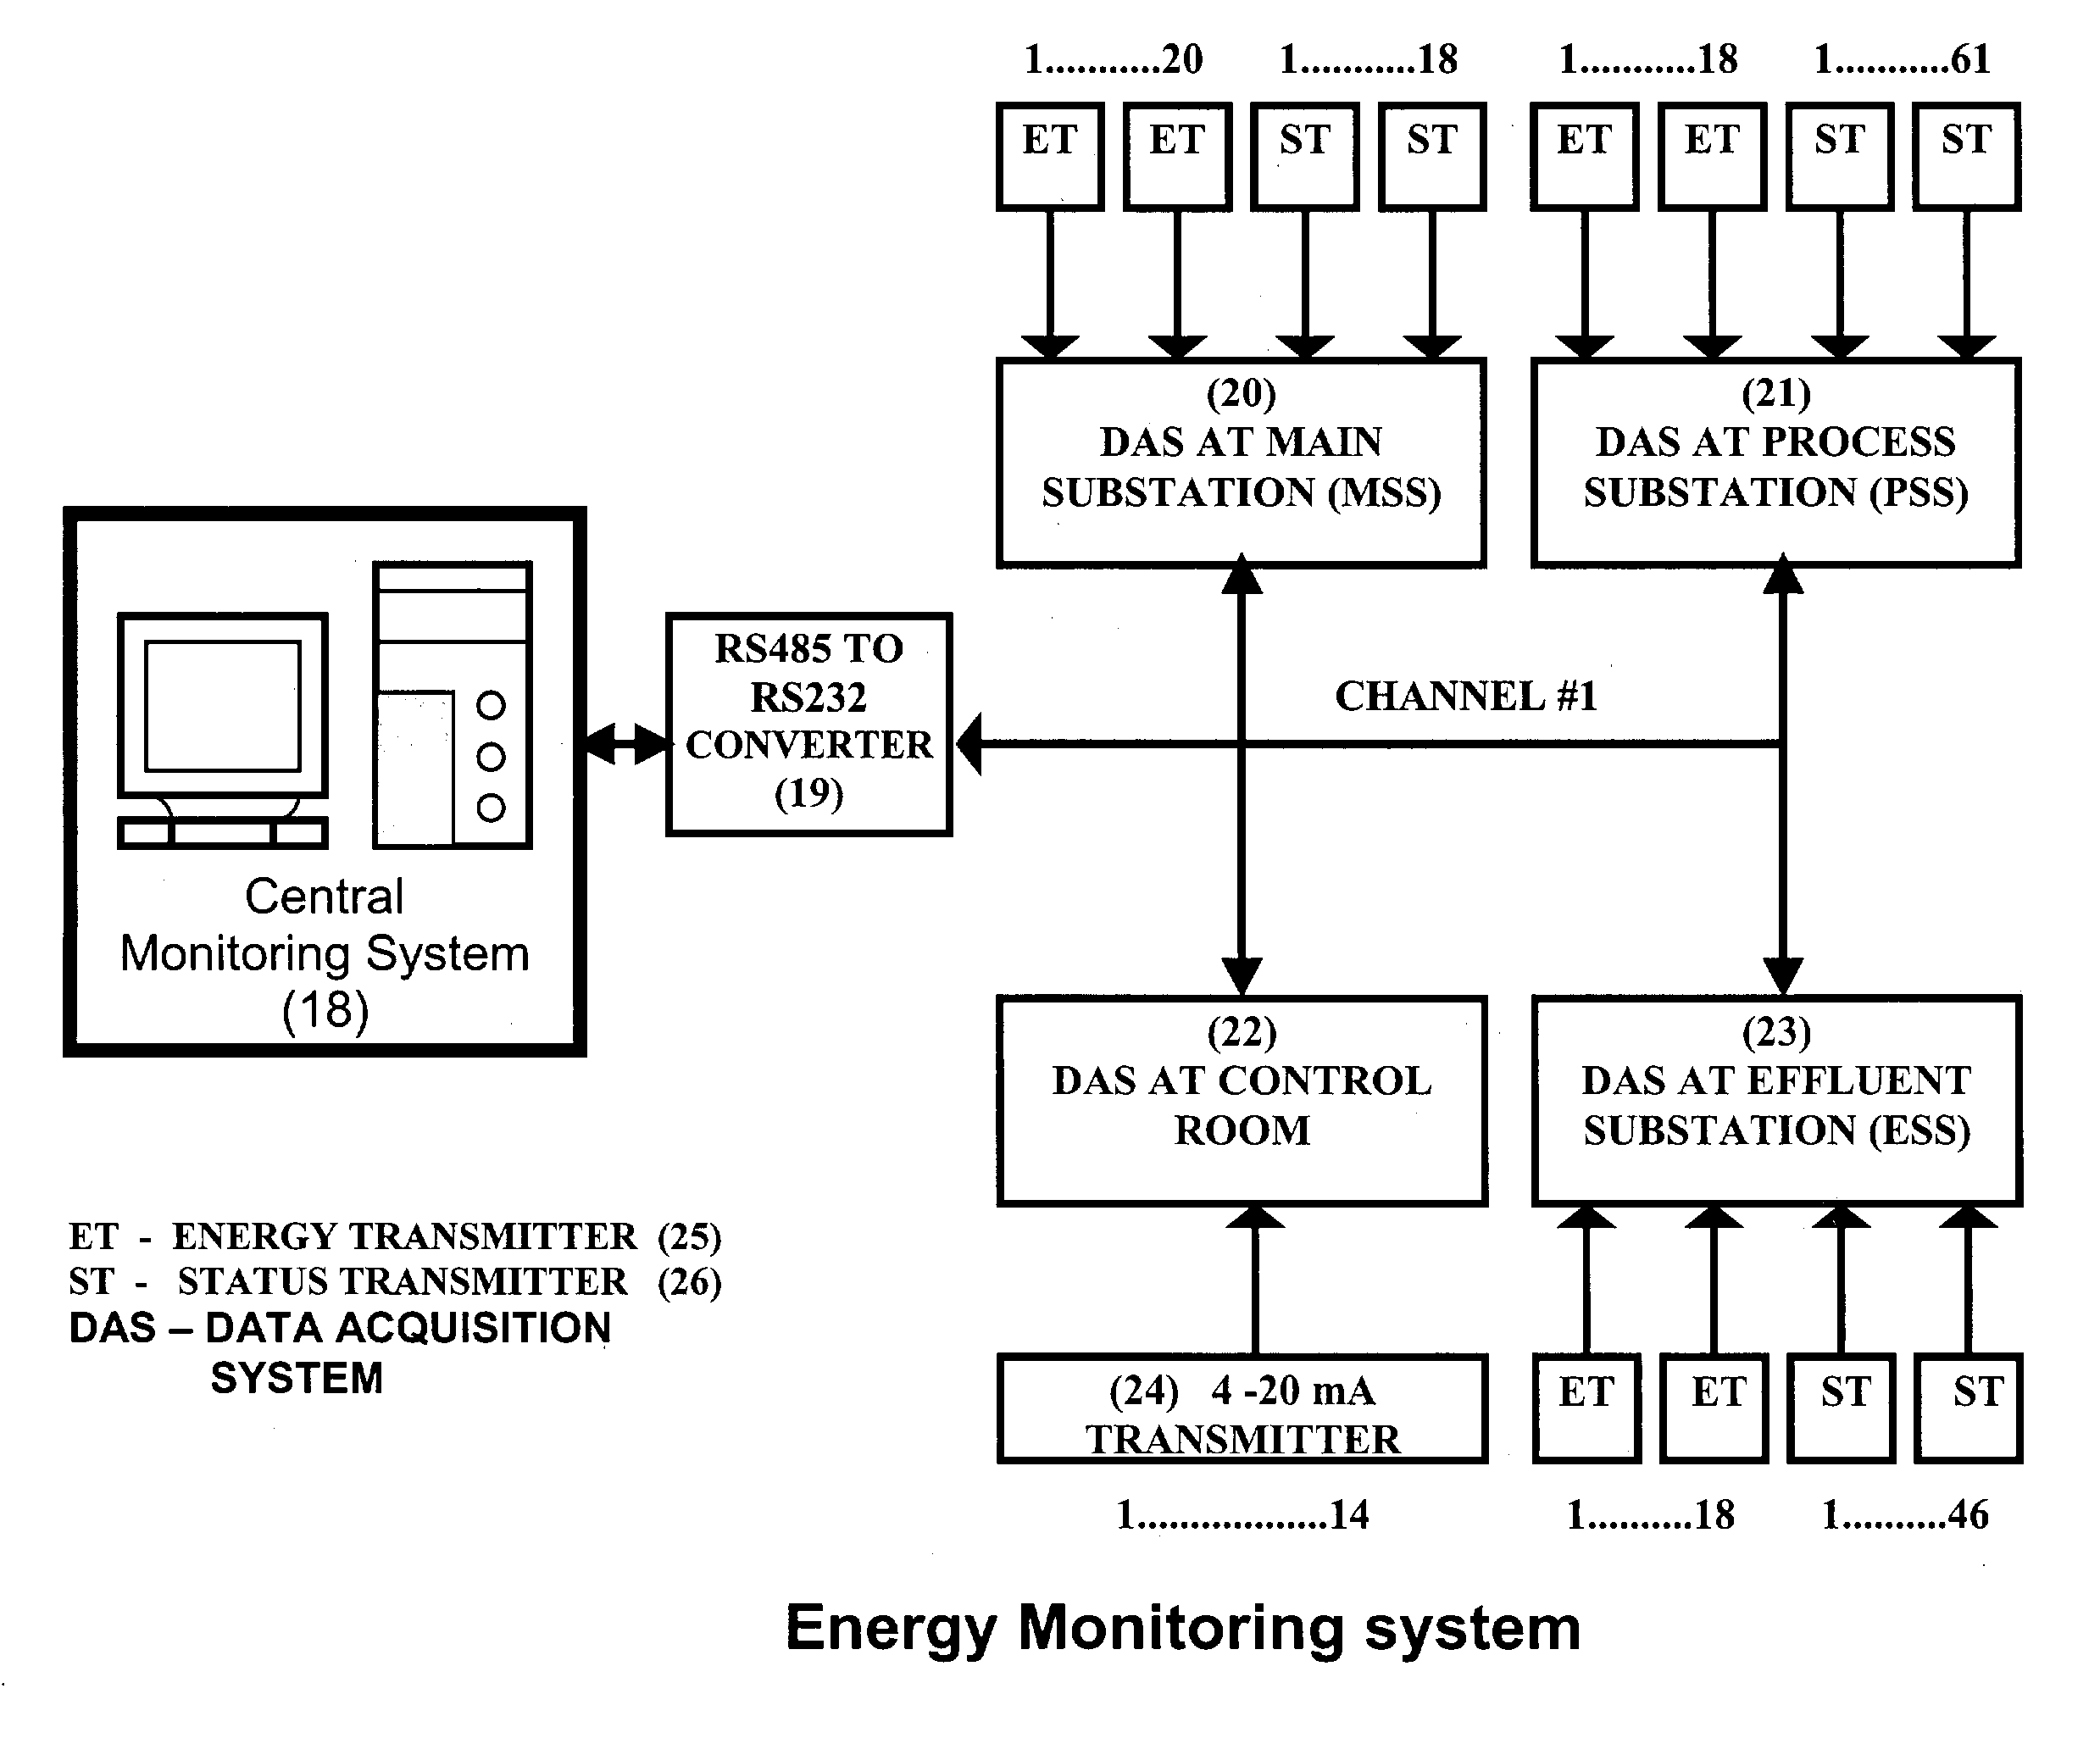 Energy efficient data acquisition system and a computer controlled on-line energy monitoring system incorporating the same